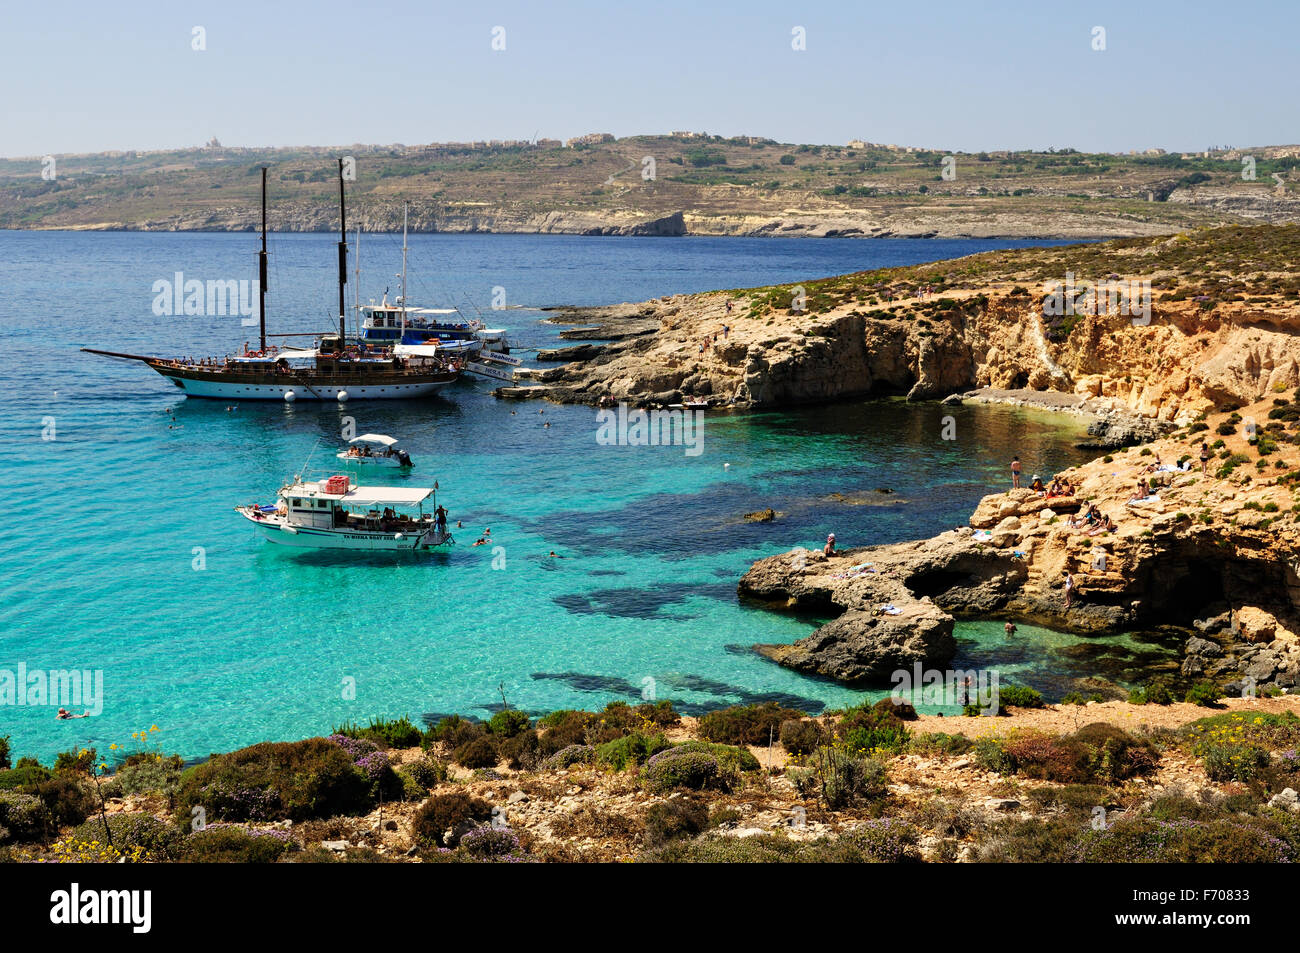 Excursion boats moored in the Blue Lagoon of Comino, Malta Stock Photo